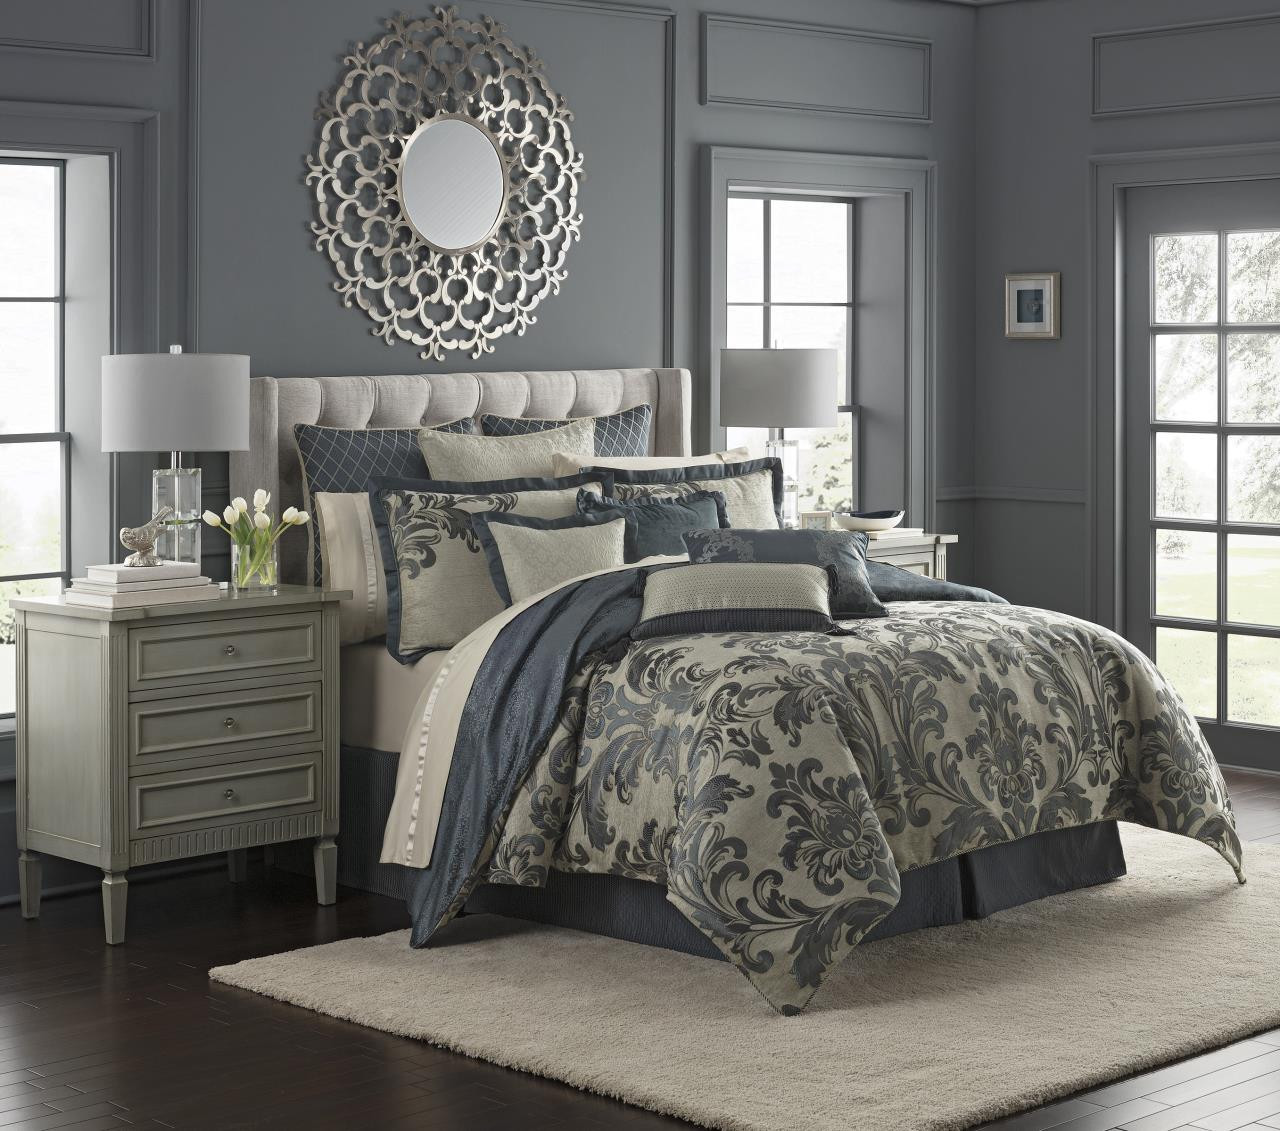 Everett Teal Bedding Collection -